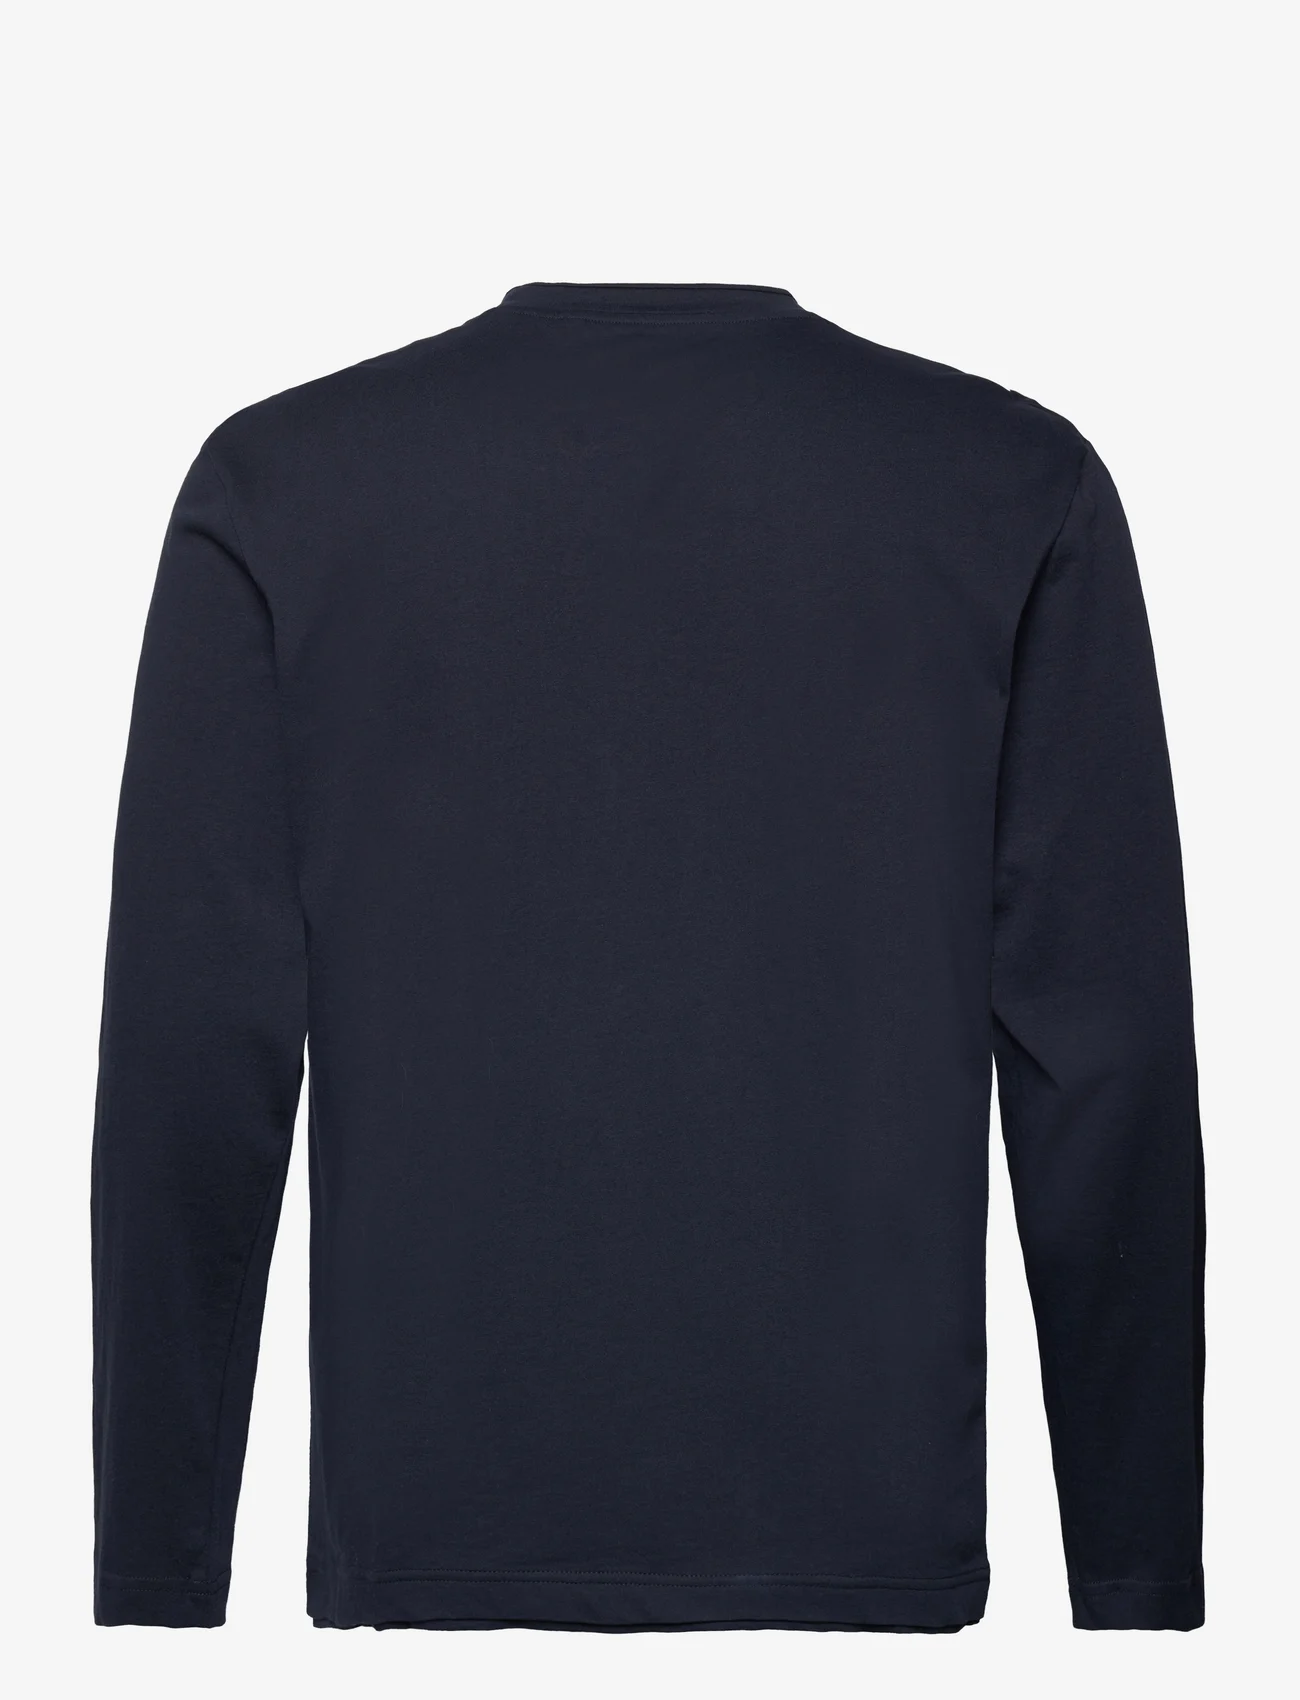 Tom Tailor - printed longsleeve - lowest prices - sky captain blue - 1